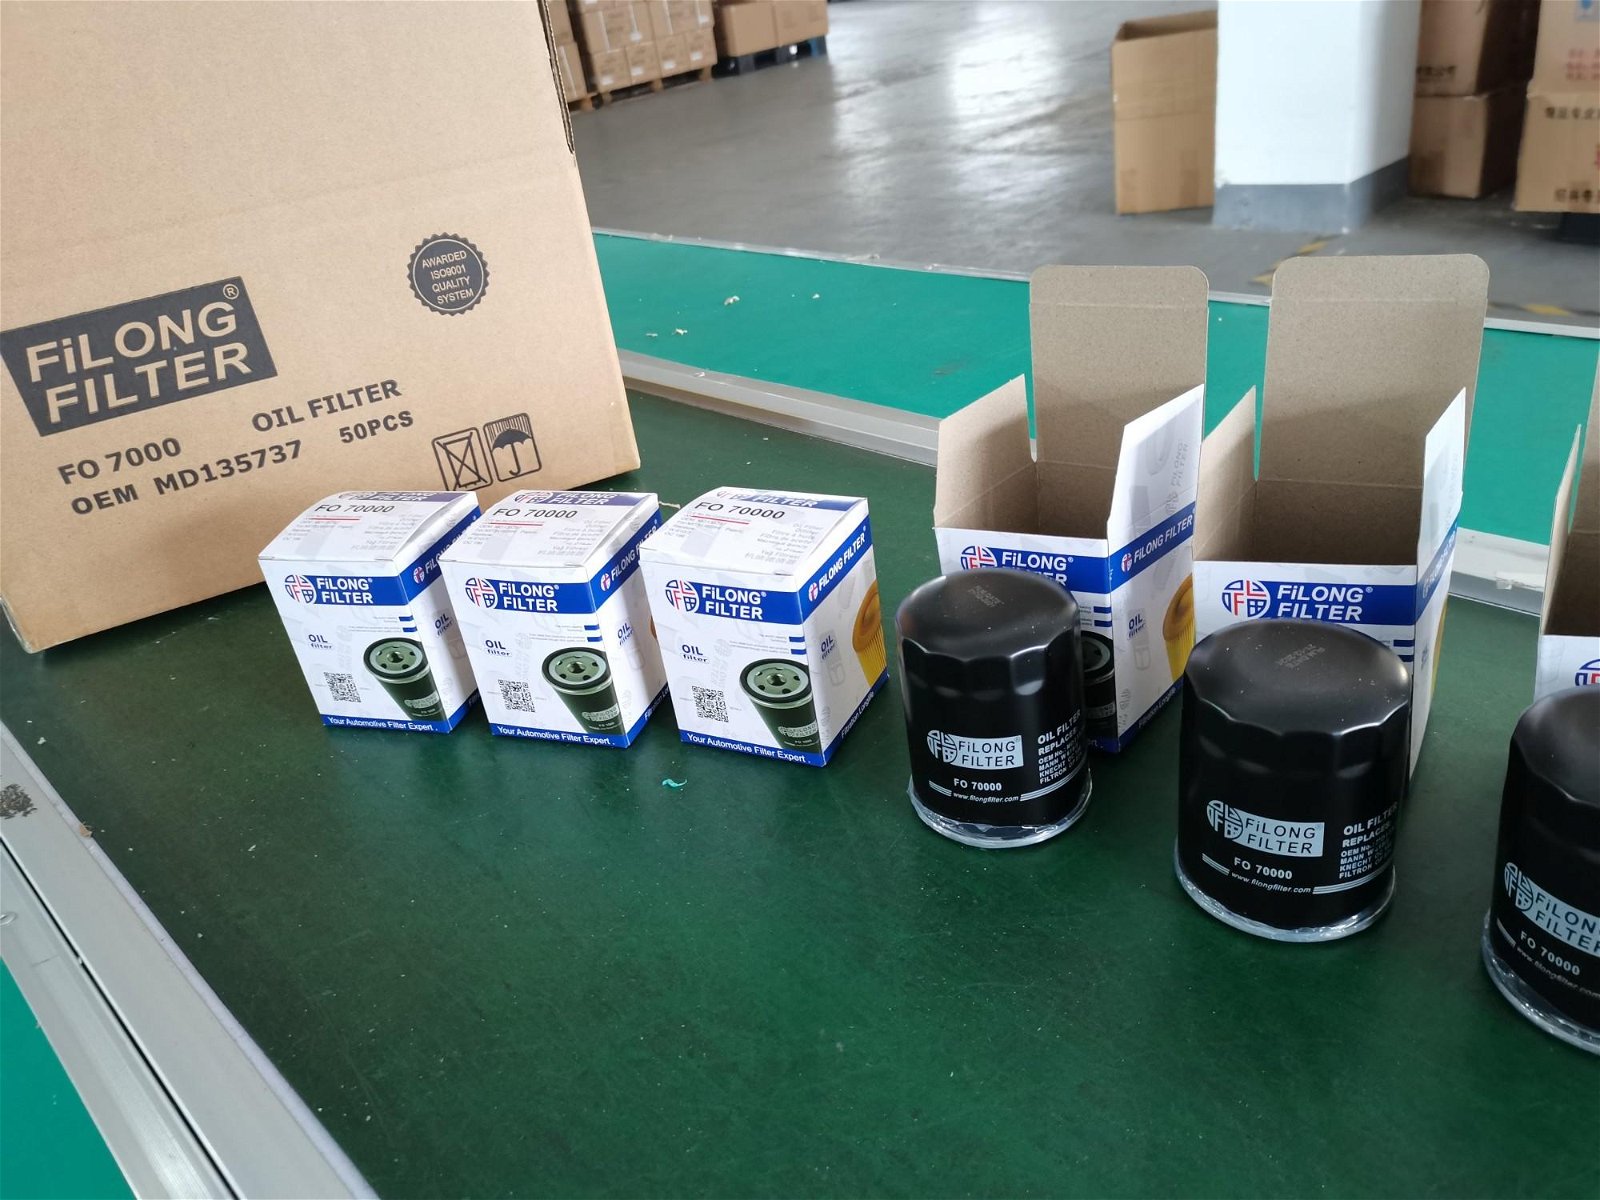  2994048 500315480 504112123 501859402,50408238  FOR IVECO Oil filter&FOR CNH  4